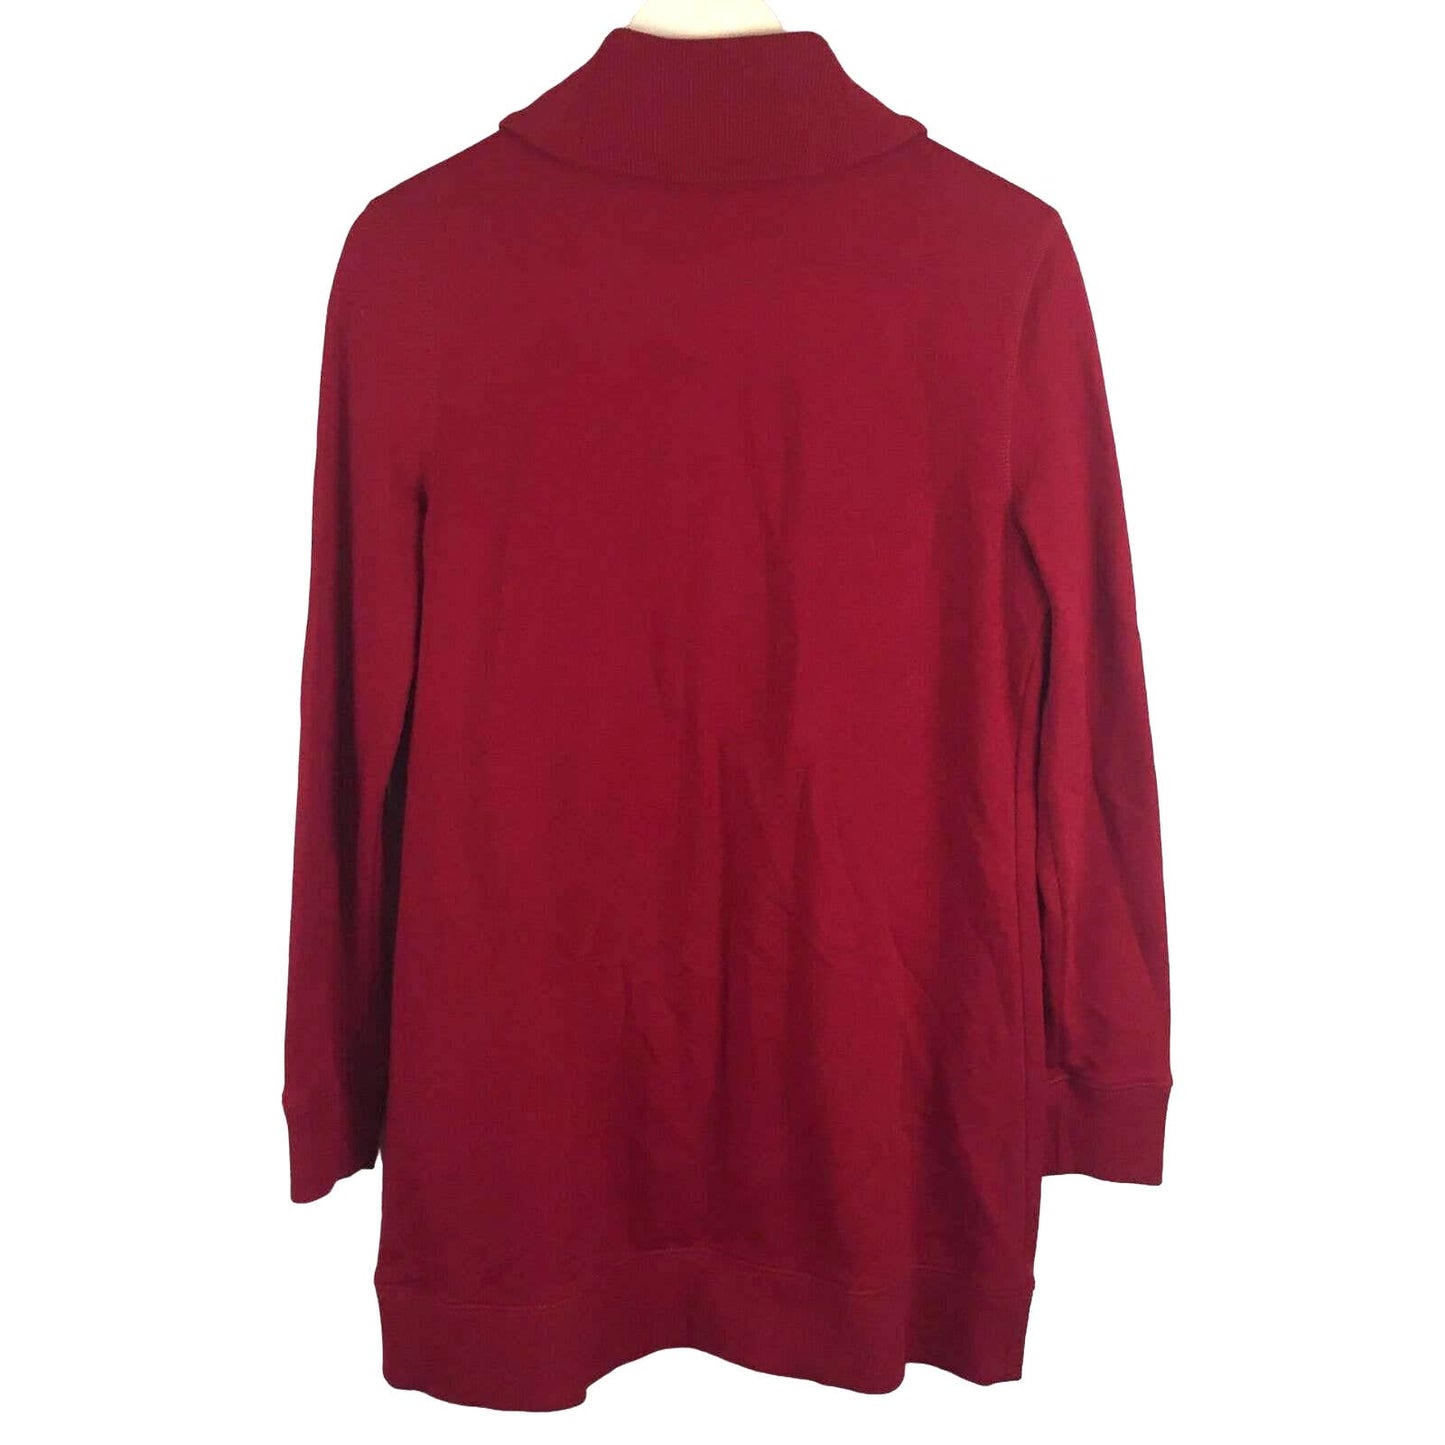 Chaps Holiday Red Cardigan Duster Toggle Closures - Women's M